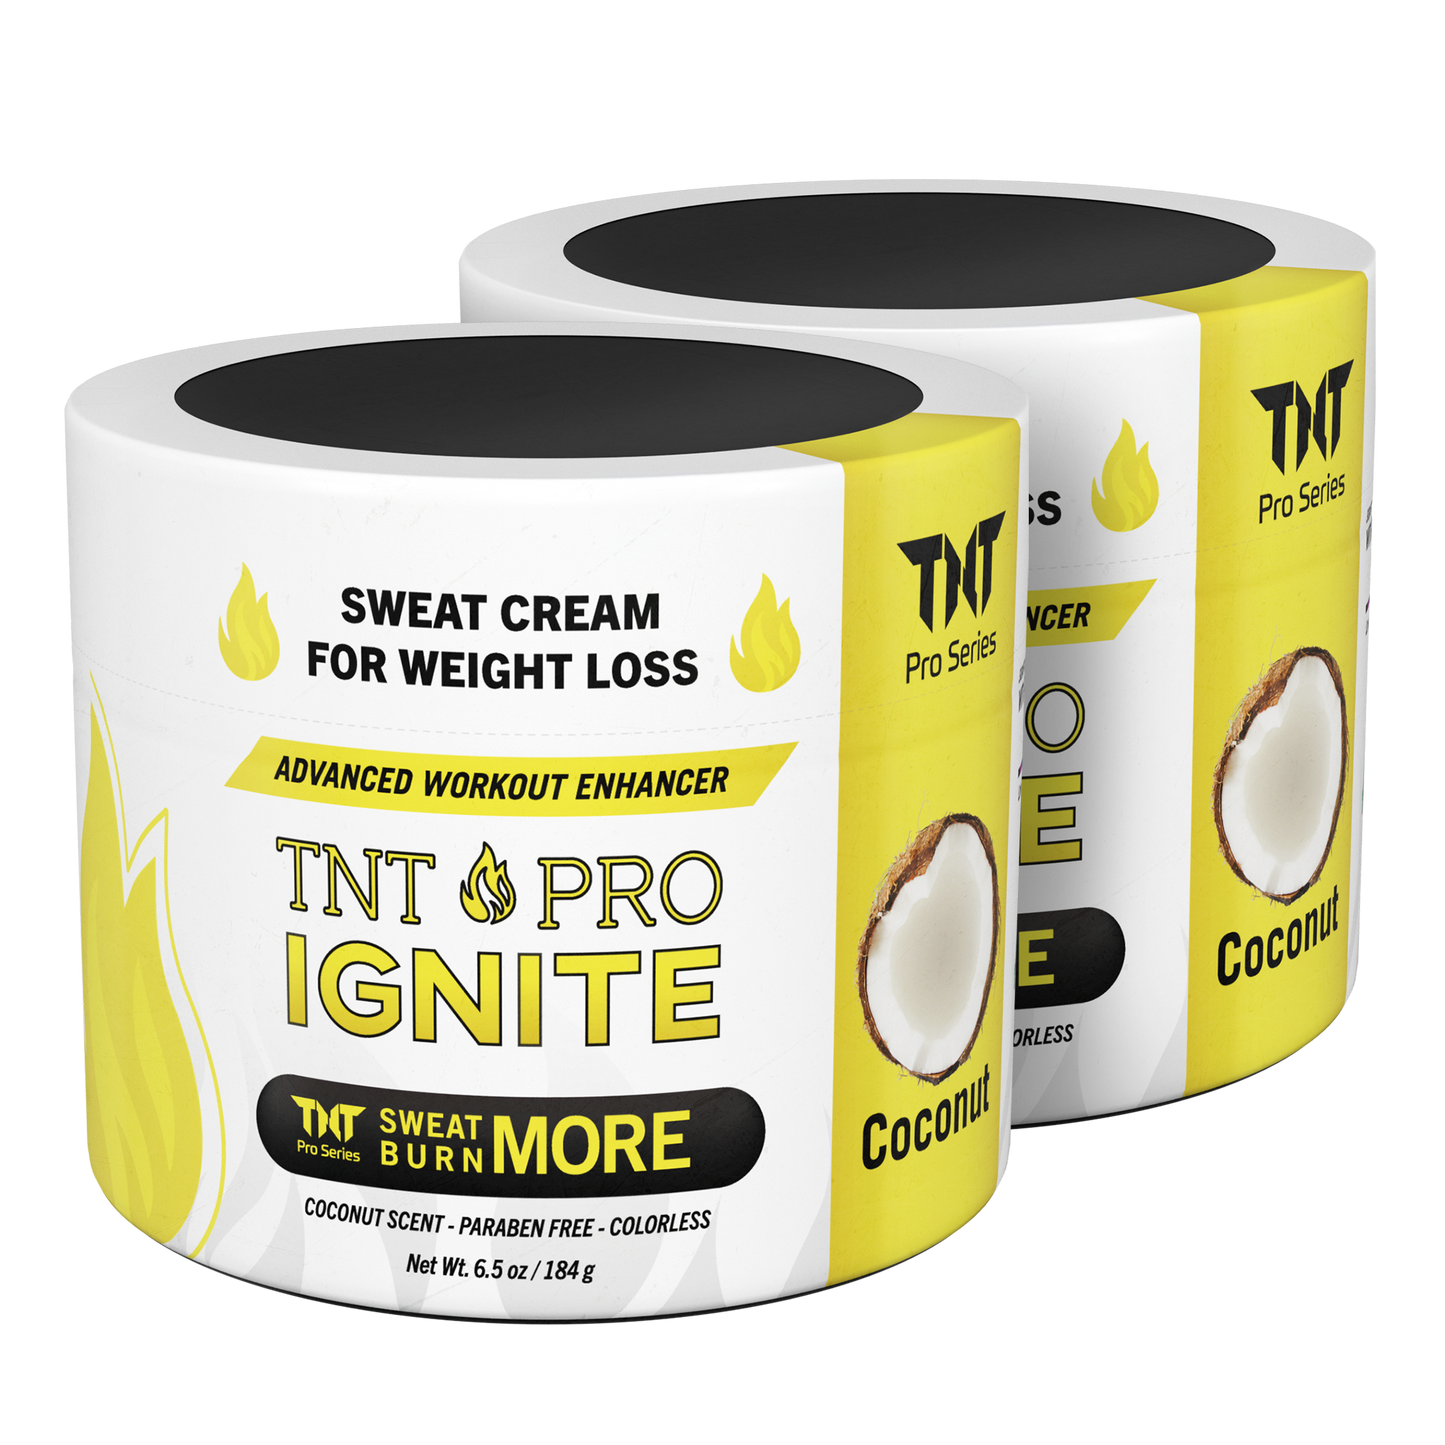 TNT Pro Ignite Coconut Sweat Cream for Men and Women - Thermogenic Weight Loss Slimming Workout Enhancer for Stomach, Abdominal Burner 2-Pack - TNT Pro Series